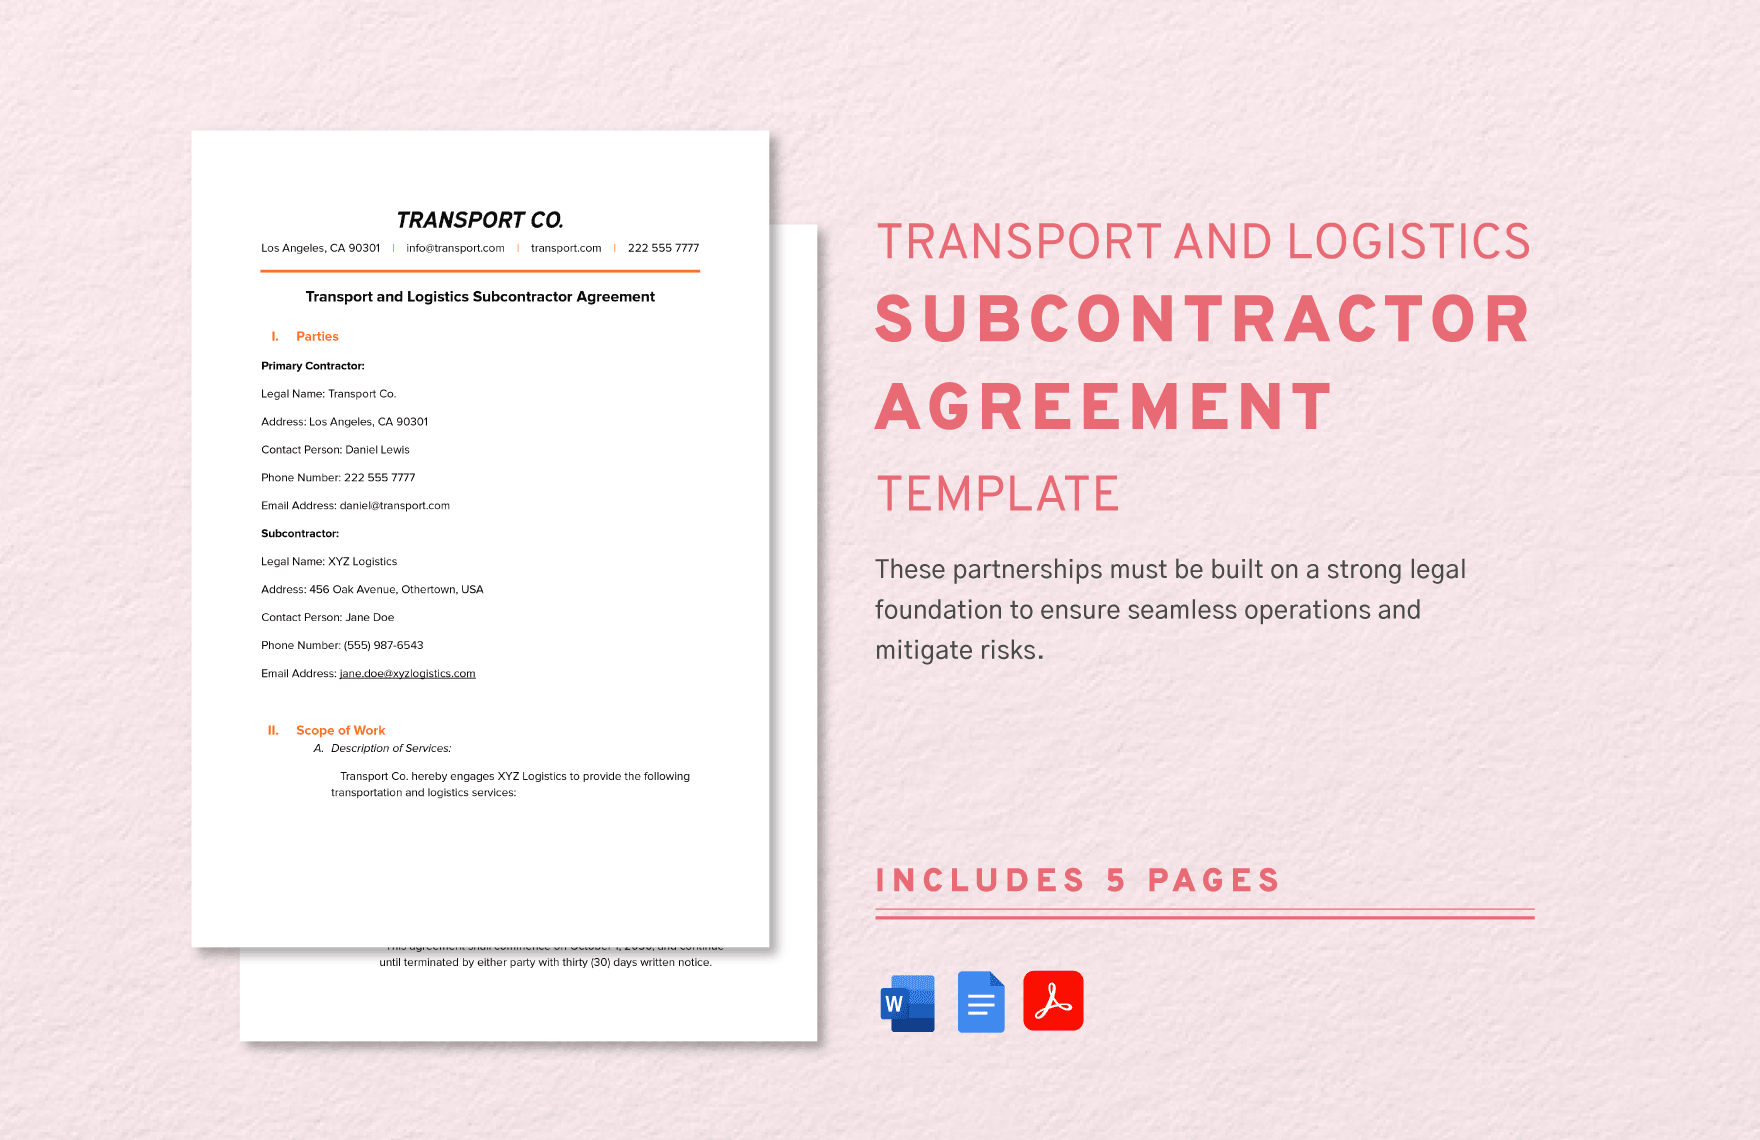 Transport and Logistics Subcontractor Agreement Template